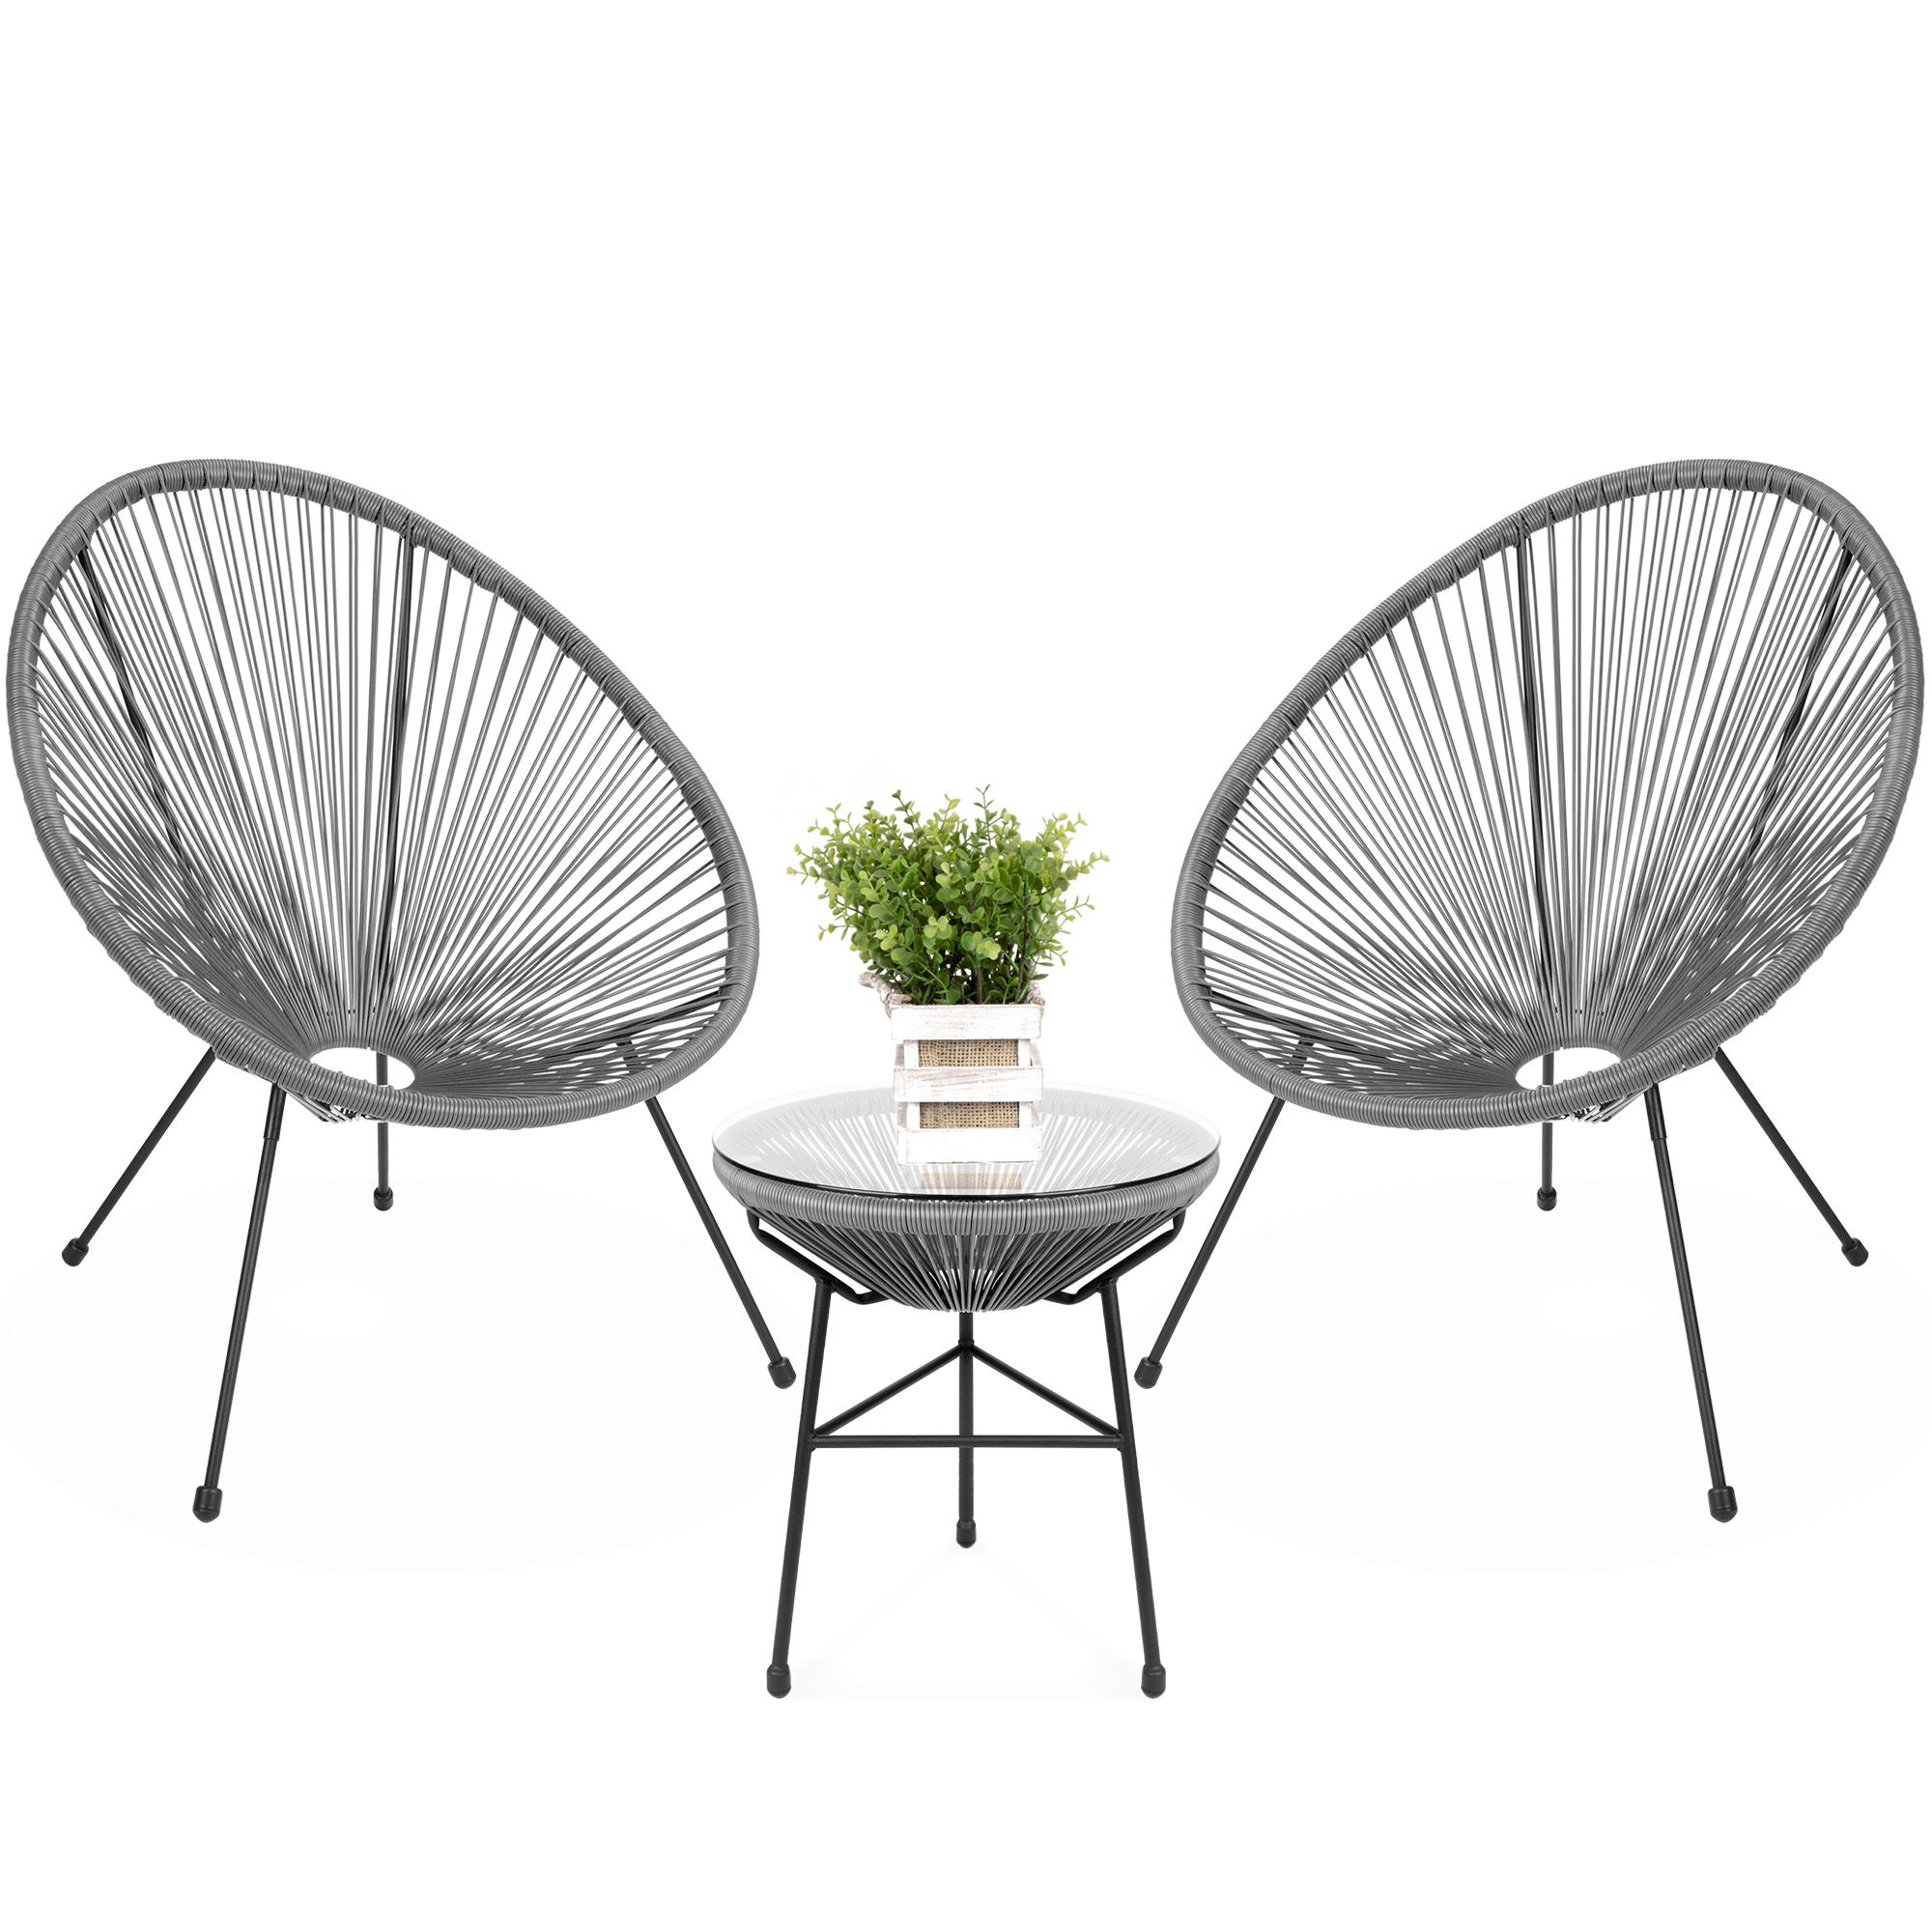 Best Choice Products 3-Piece All-Weather Patio Acapulco Bistro Furniture Set w/ Rope, Glass Top Table - Gray - image 1 of 7